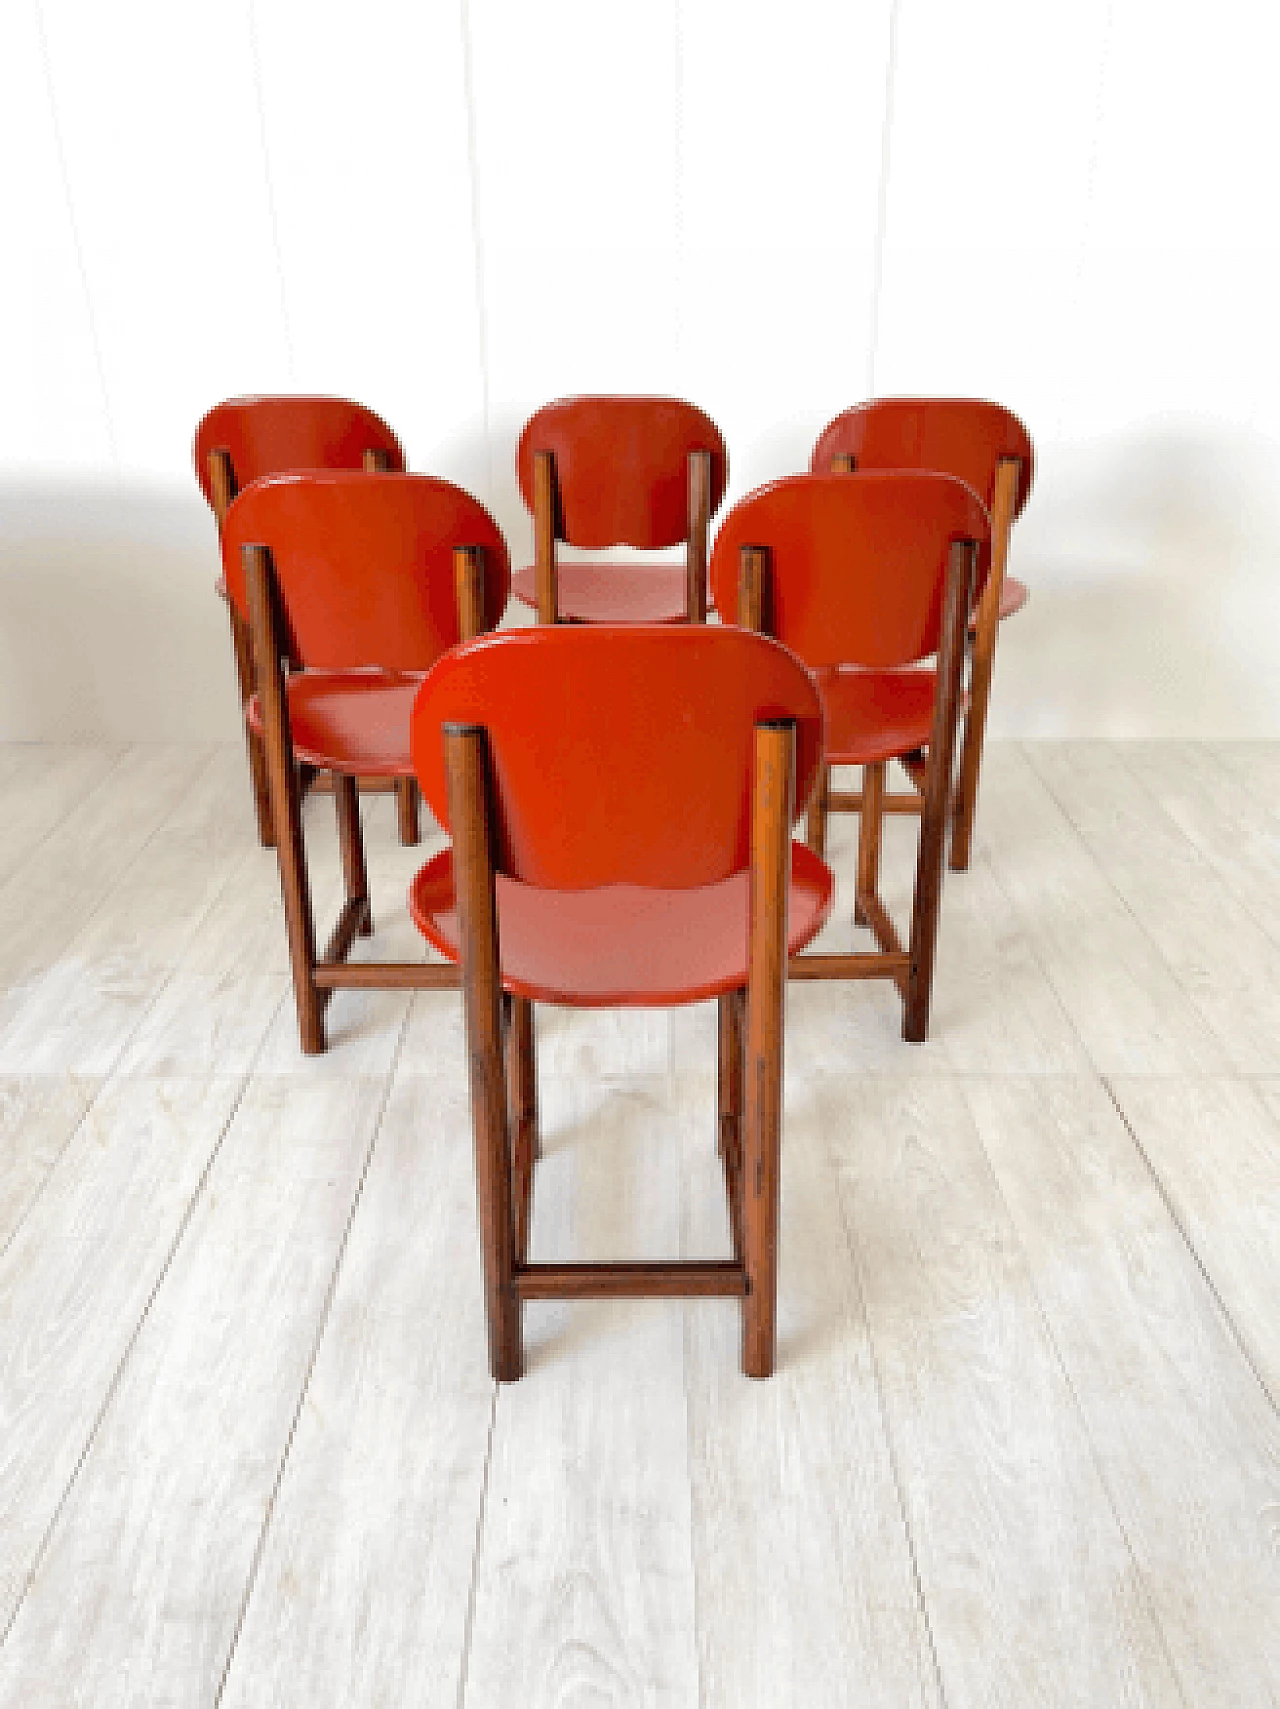 6 New Harmony chairs by Afra and Tobia Scarpa for Maxalto, 1970s 6